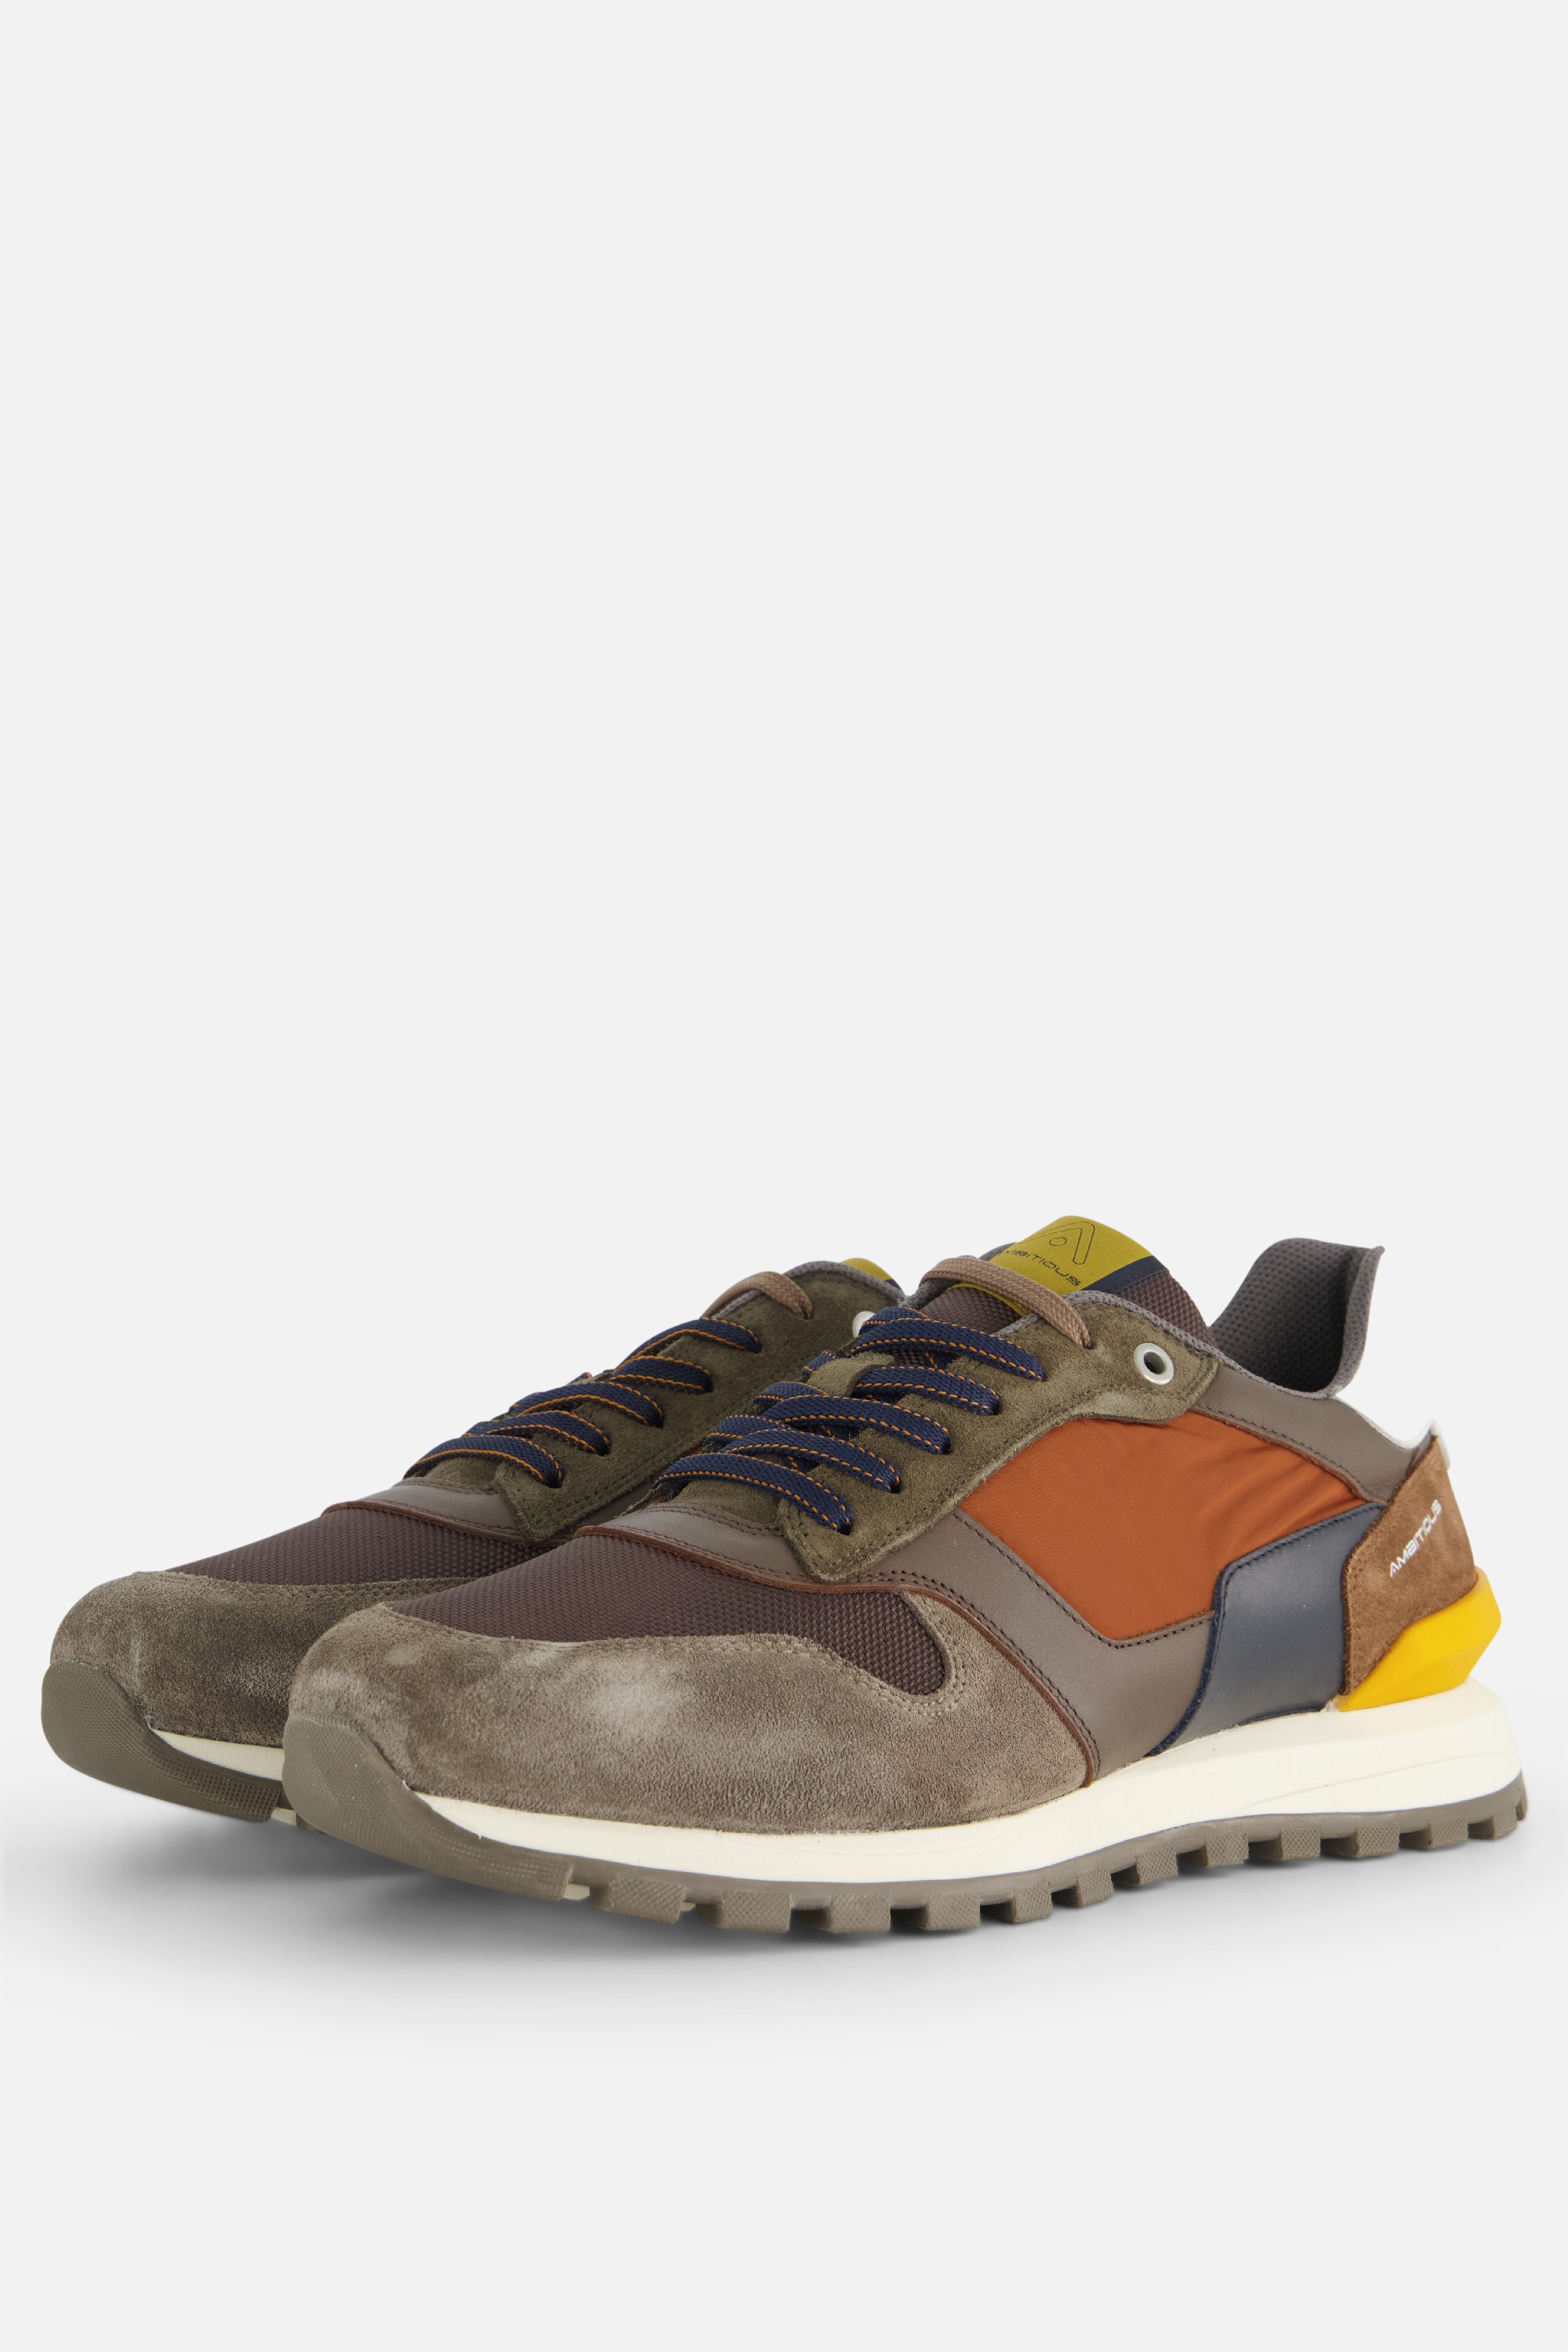 Ambitious Ambitious Silky Sneakers oranje Leer